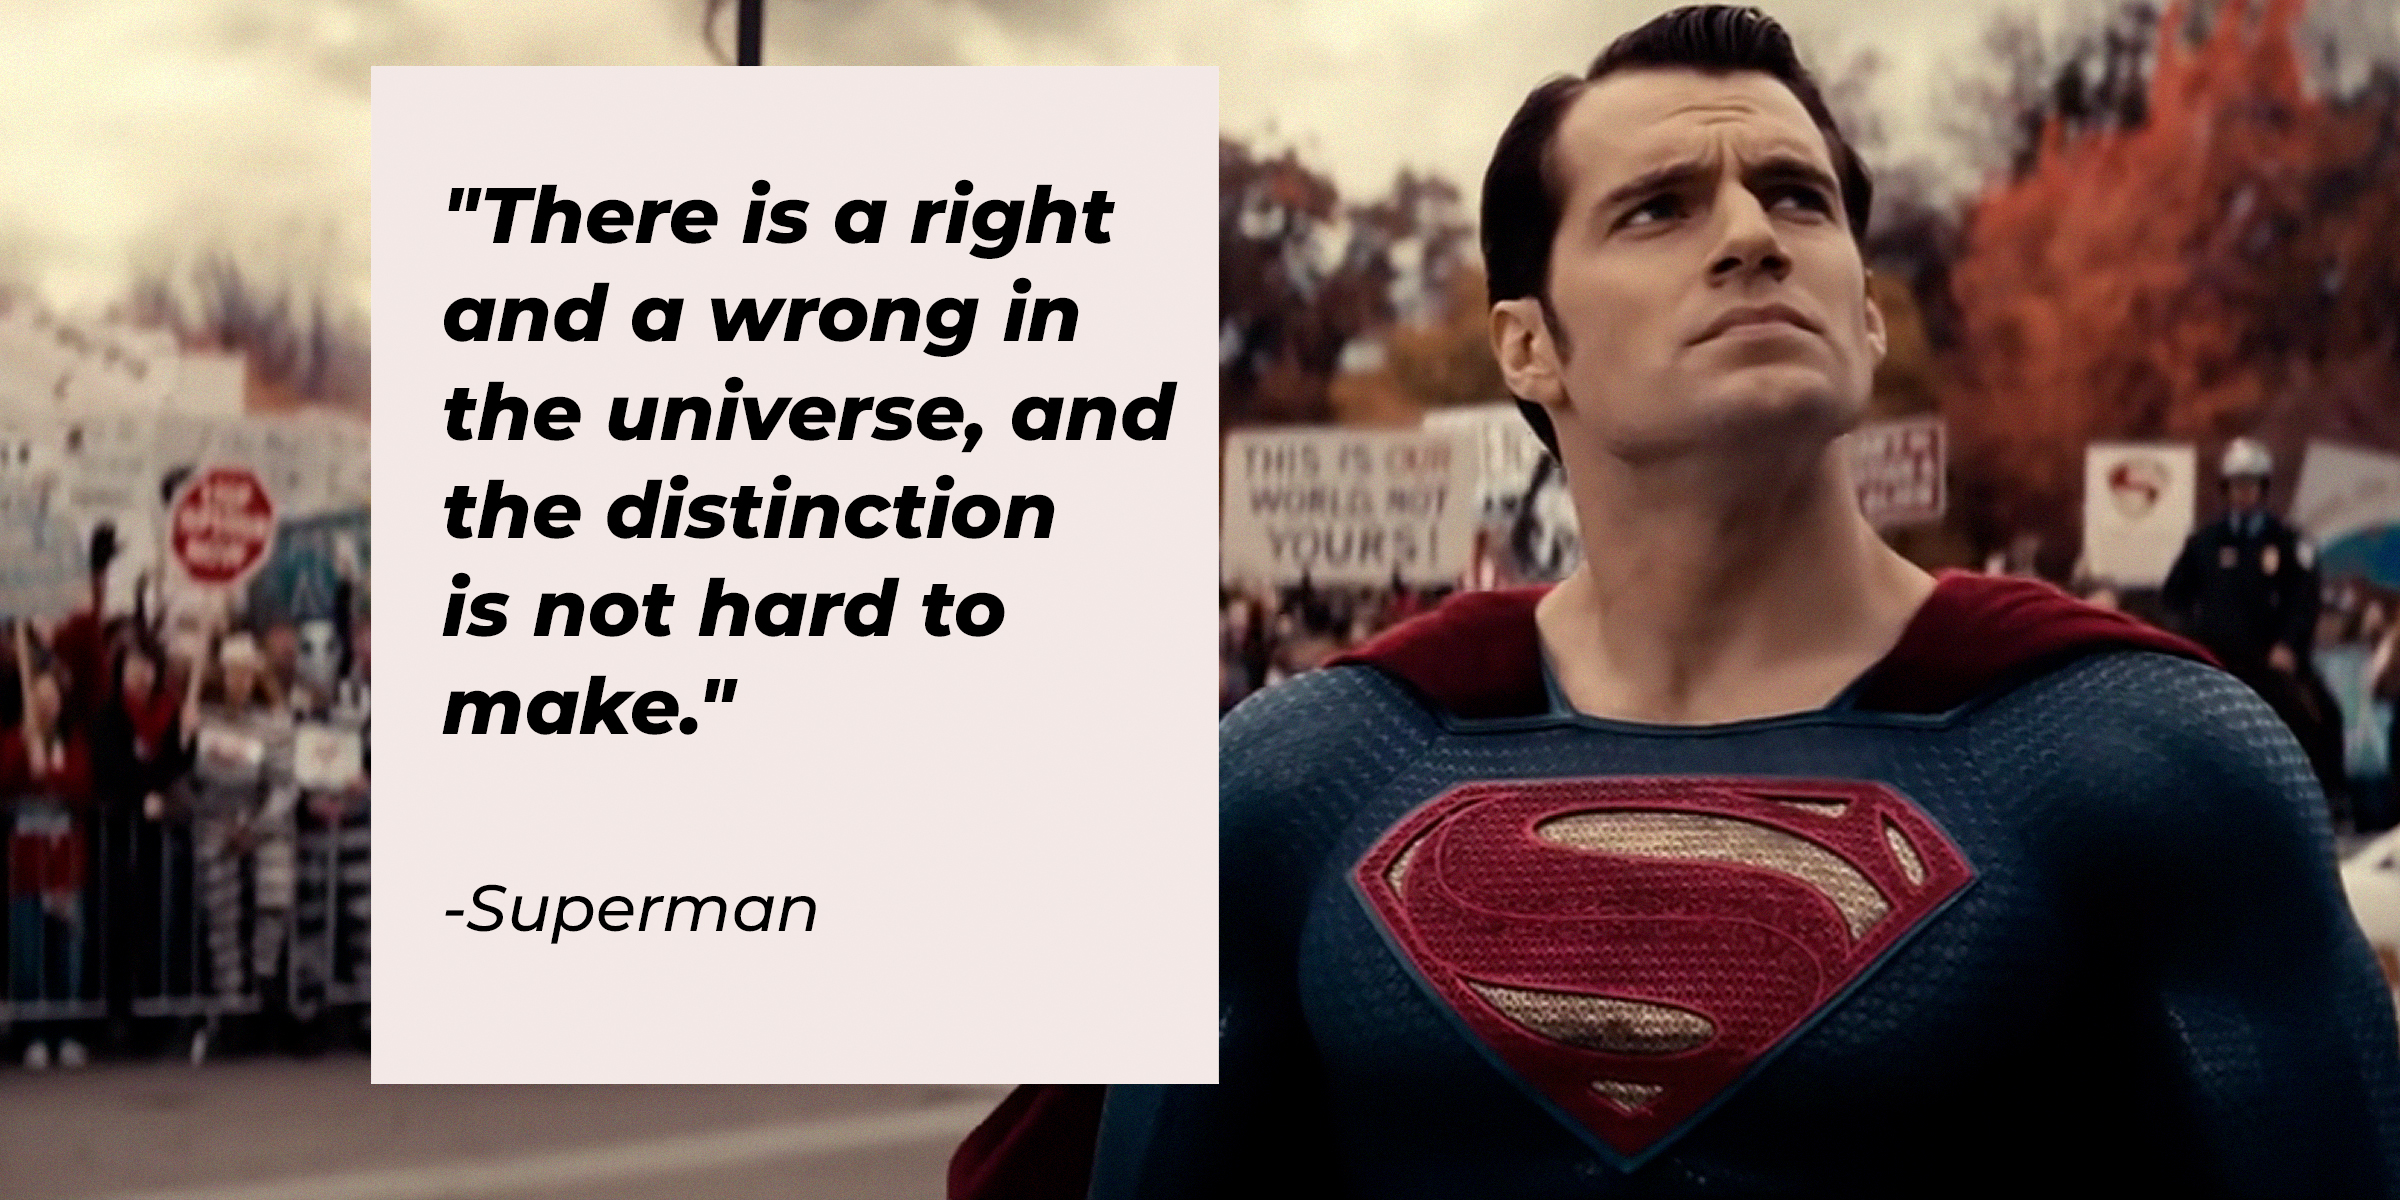 An image of Superman with his quote, "There is a right and a wrong in the universe, and the distinction is not hard to make." | Source: facebook.com/dc